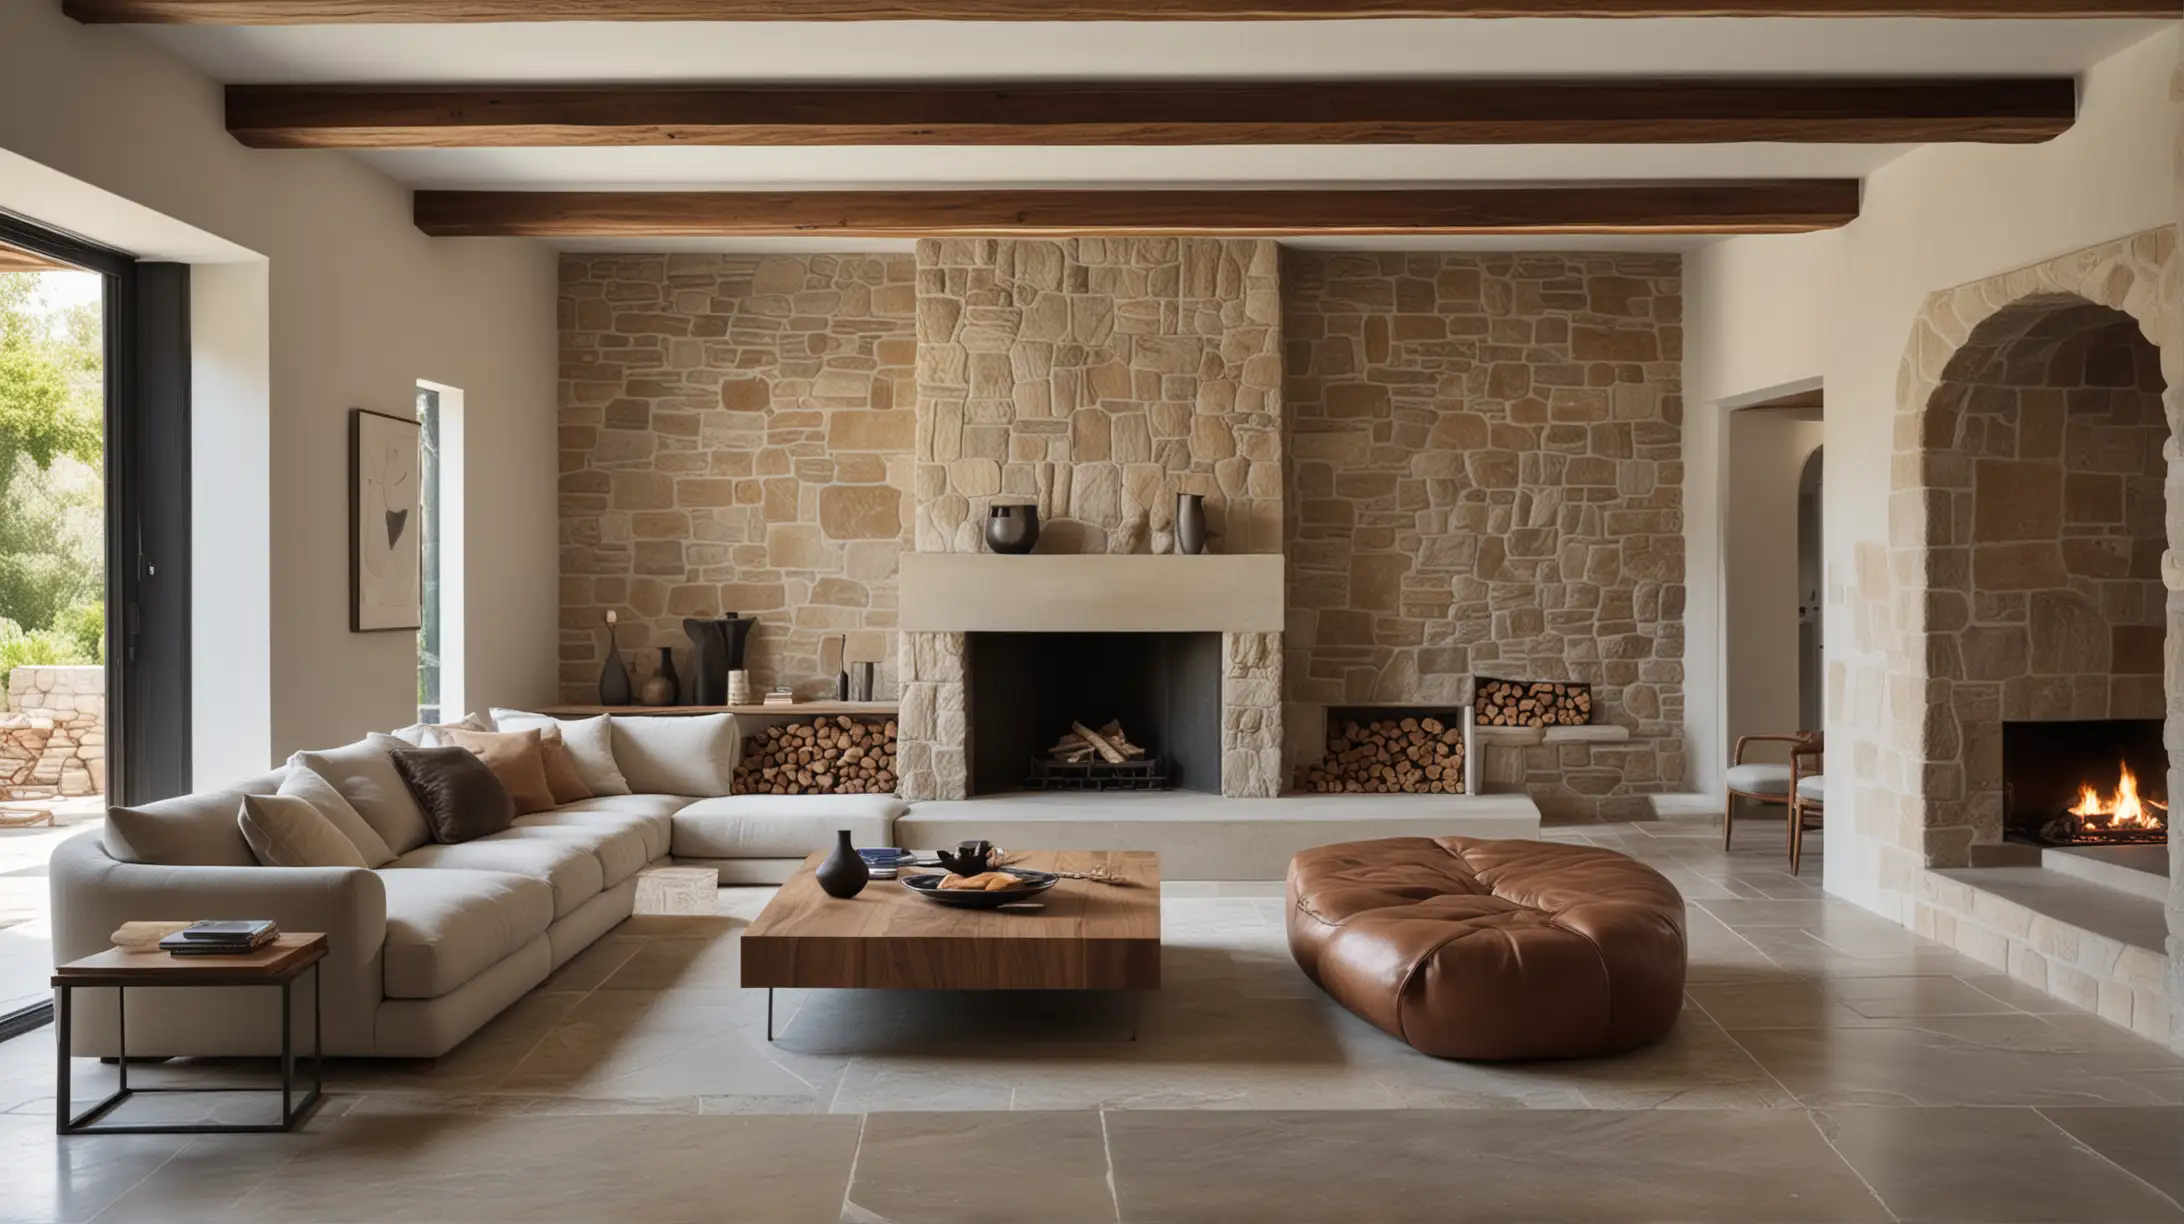 a large greek stone house lounge room that is moody and organic; walnut wood; large fireplace

